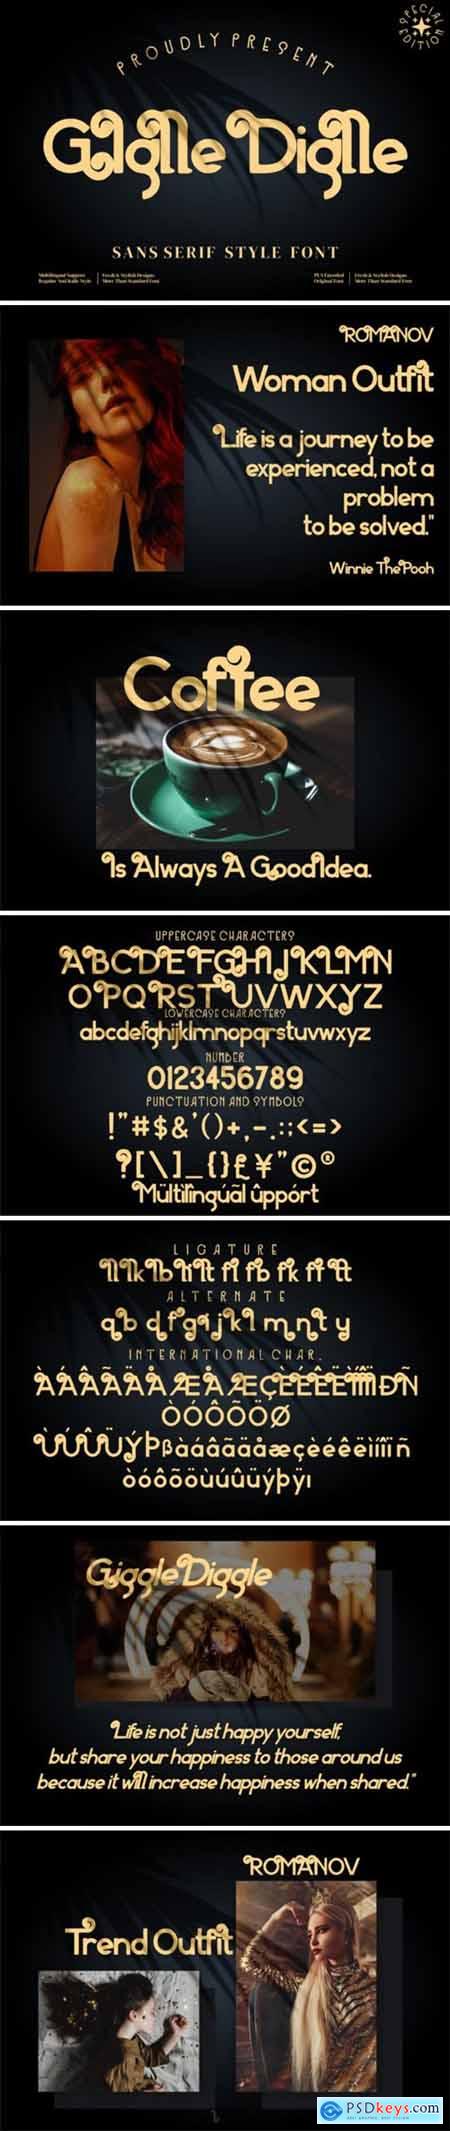 Giglle Diglle Font